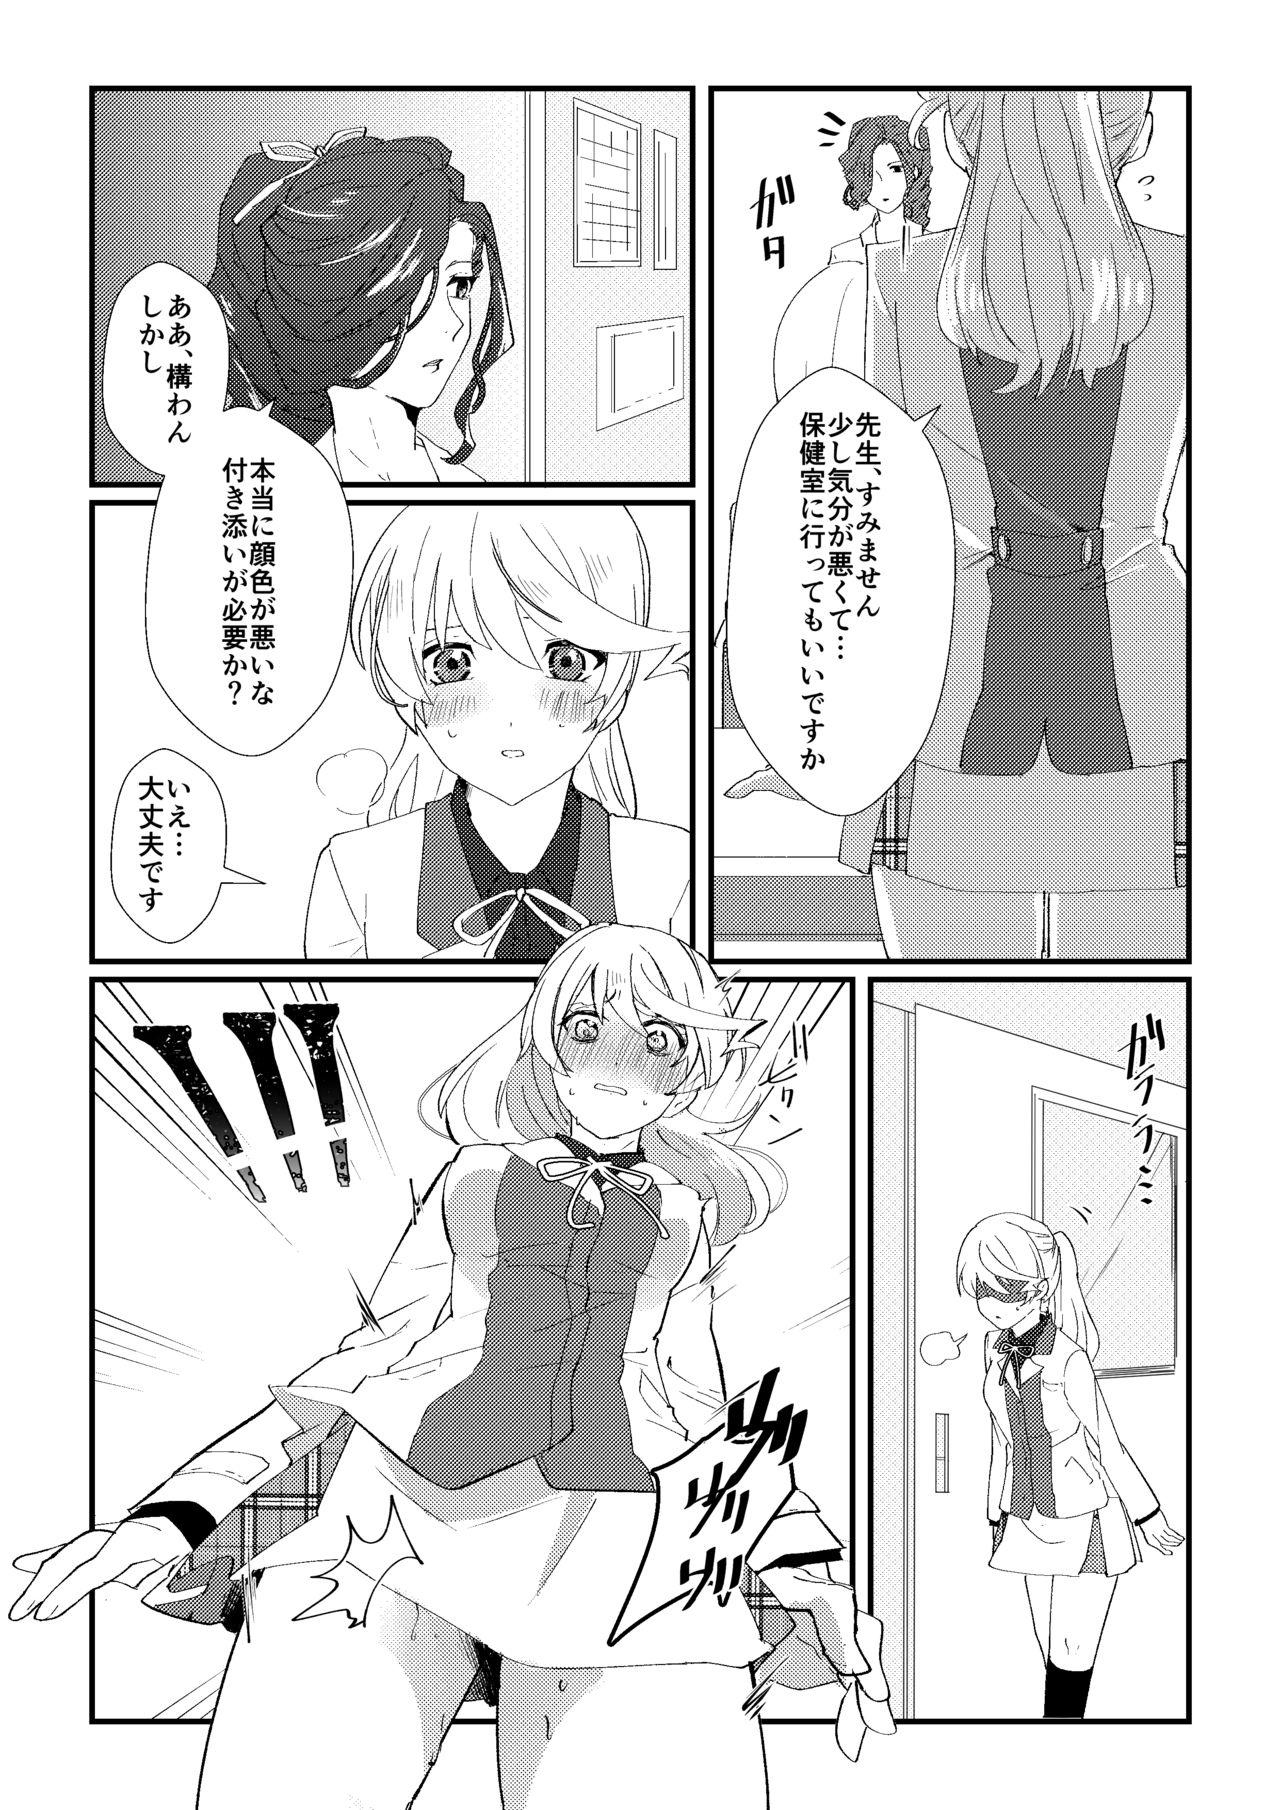 Asses crazy about you - Tales of zestiria Love - Page 3